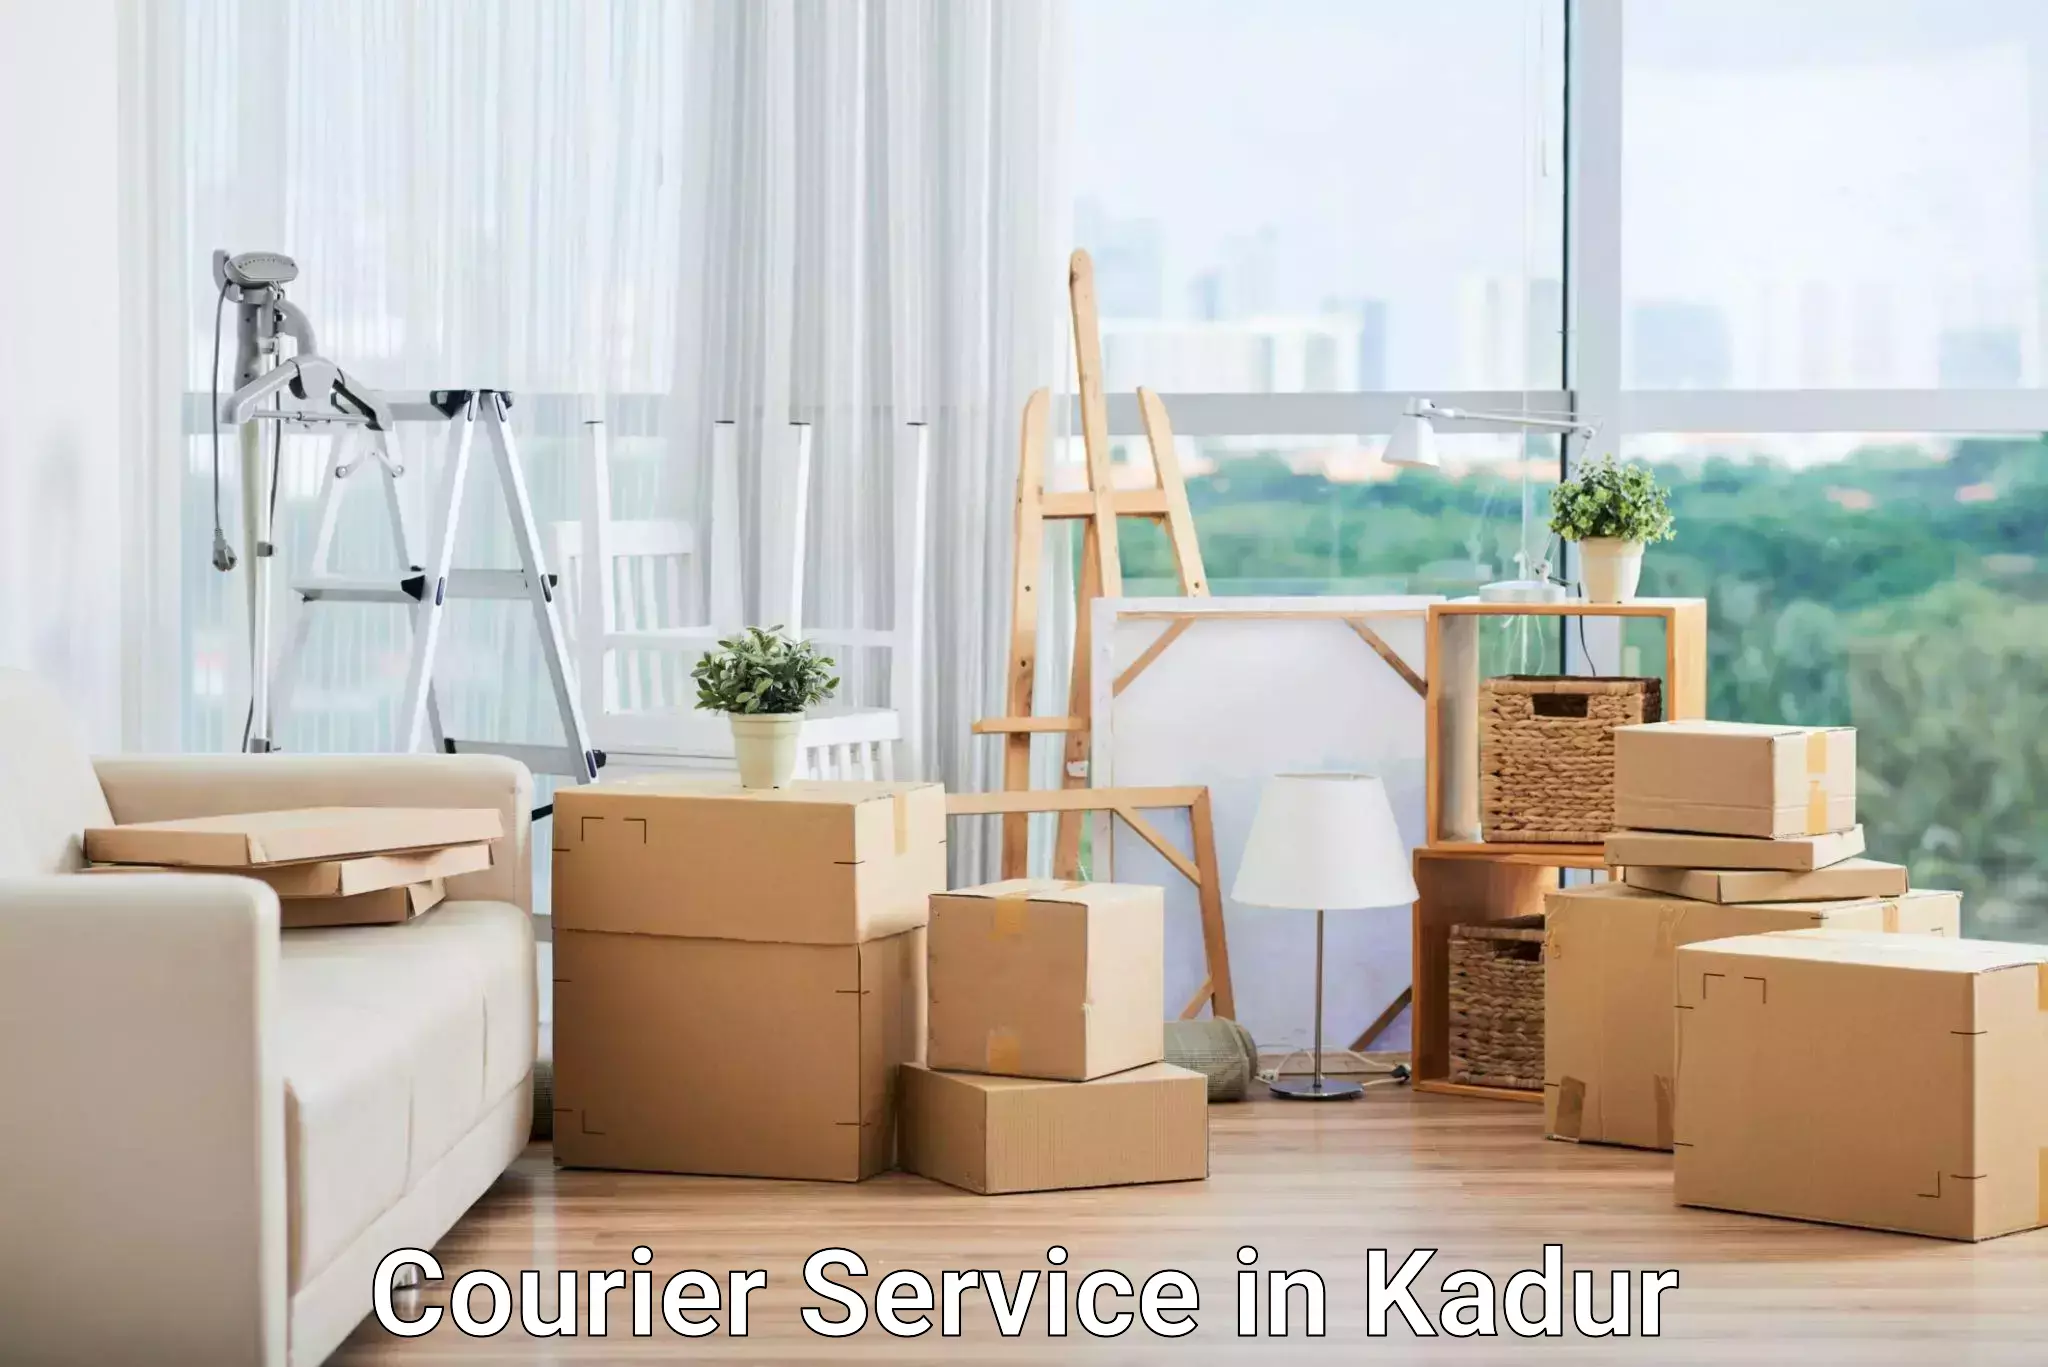 Advanced parcel tracking in Kadur